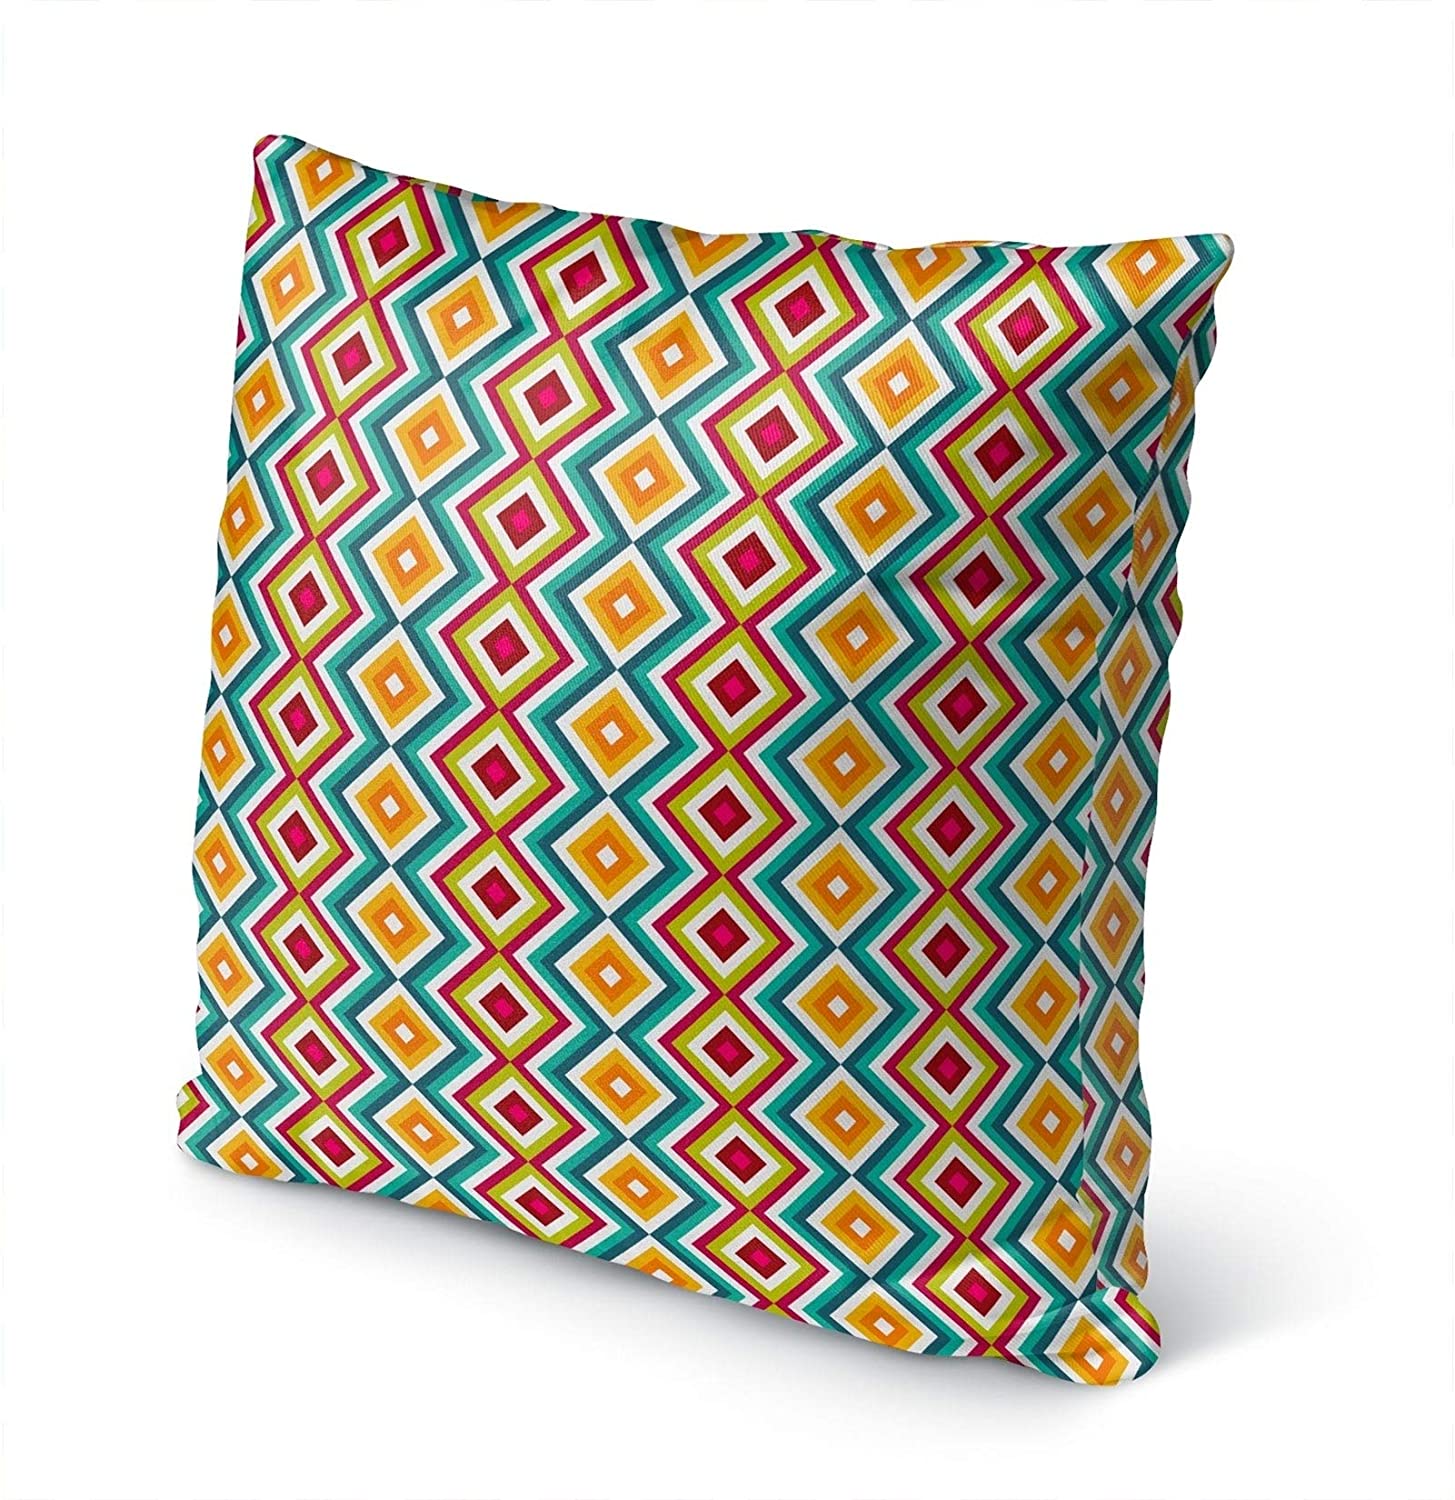 MISC Aztec Pride Indoor|Outdoor Pillow by 18x18 Blue Geometric Bohemian Eclectic Polyester Removable Cover